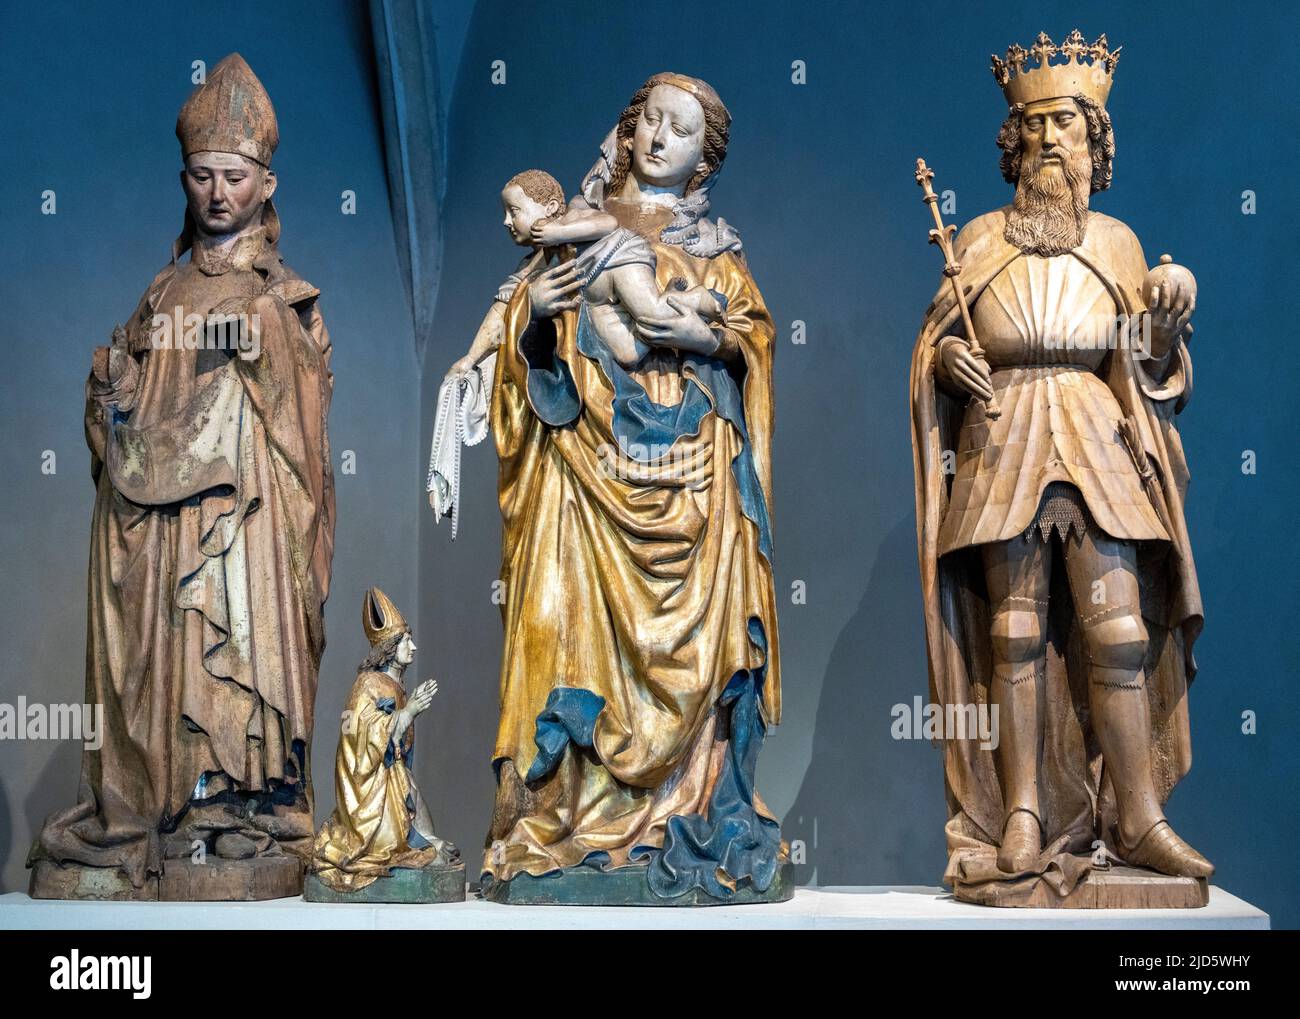 Sculptures from the high altar of the cathedral of Freising, Jakob Kaschauer, Vienna 1443, Bavarian National Museum, Munich, Germany Stock Photo